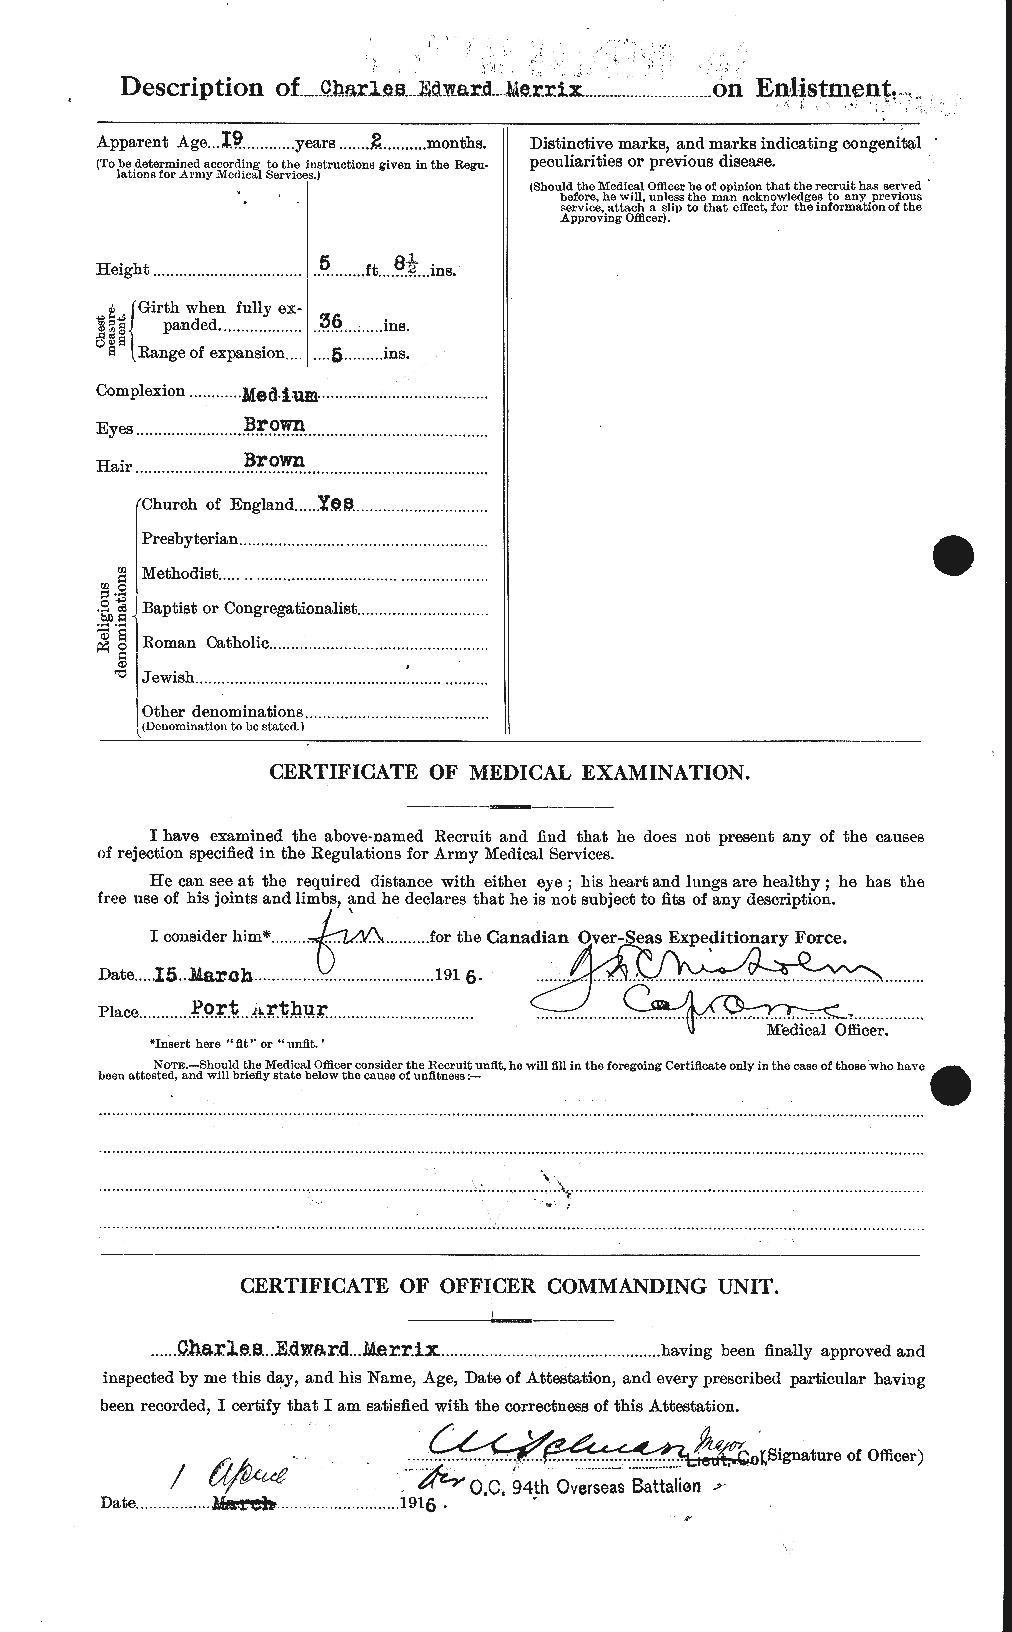 Personnel Records of the First World War - CEF 490484b